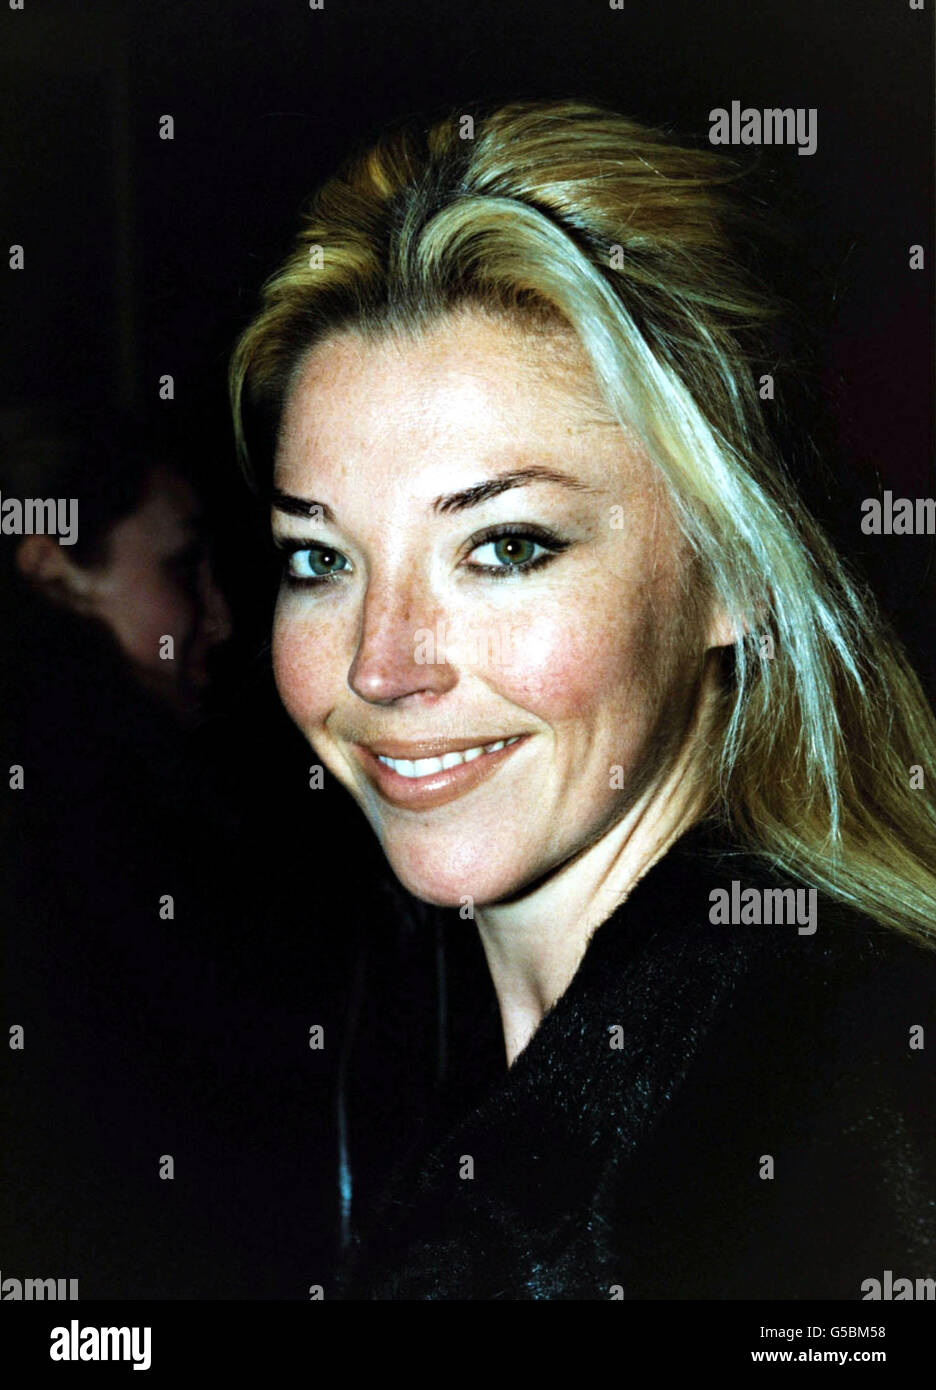 Socialite Tamara Beckwith at The Mexican film premiere at Planet Hollywood,  London Stock Photo - Alamy